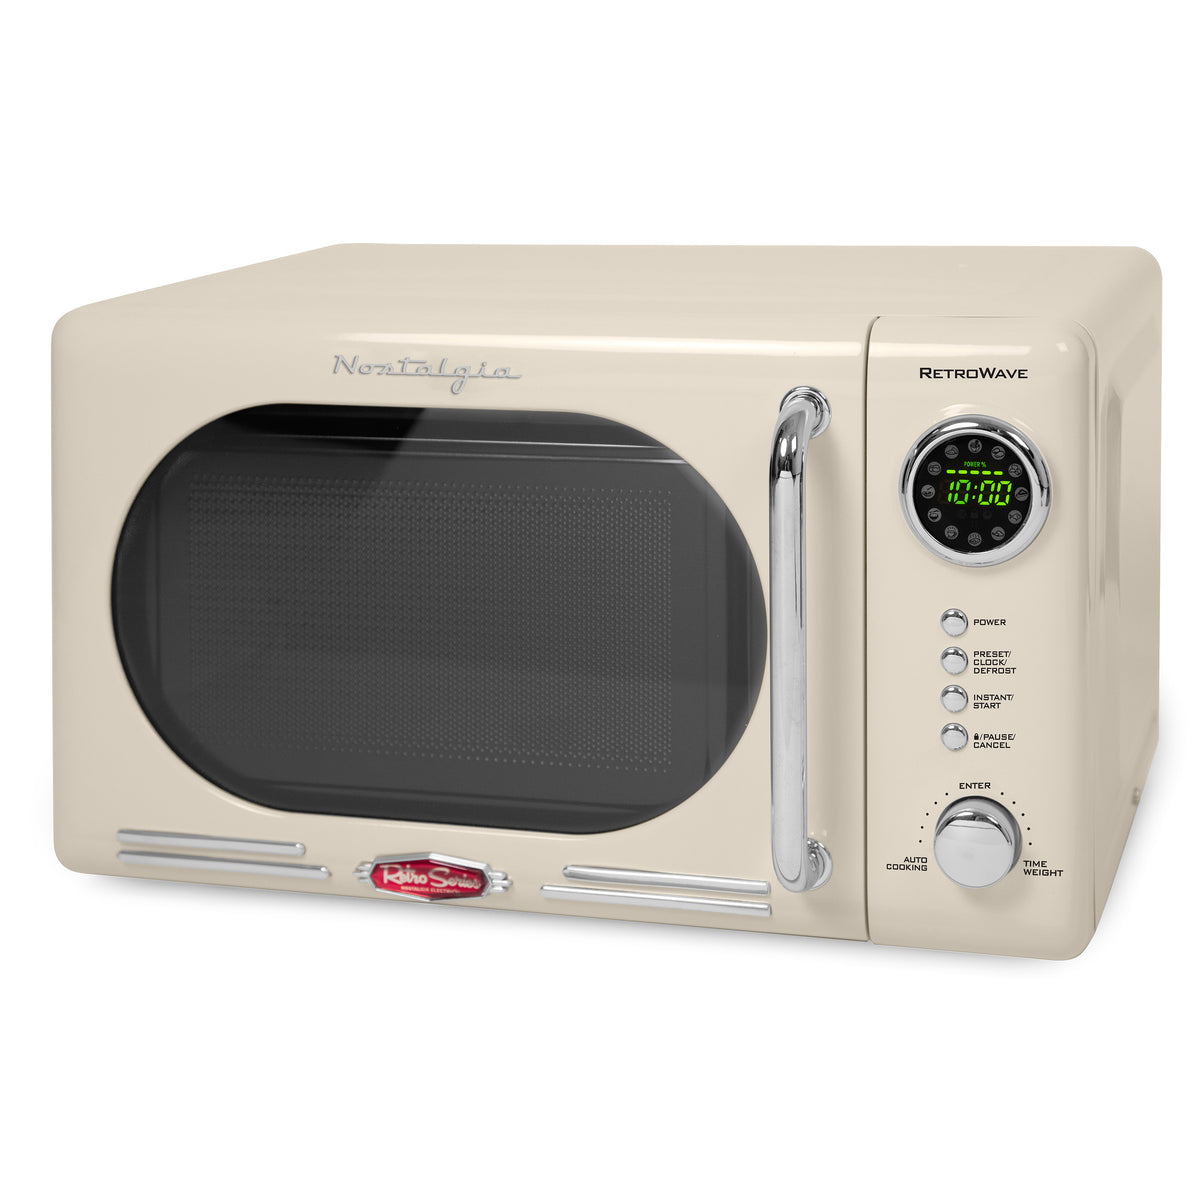 SIMOE Small Microwave Oven, 0.7 Cu Ft 700W Countertop Retro Microwave with  8 Auto-cooking Set & Defrost, Child Lock, Compact Microwave w/10 Inch